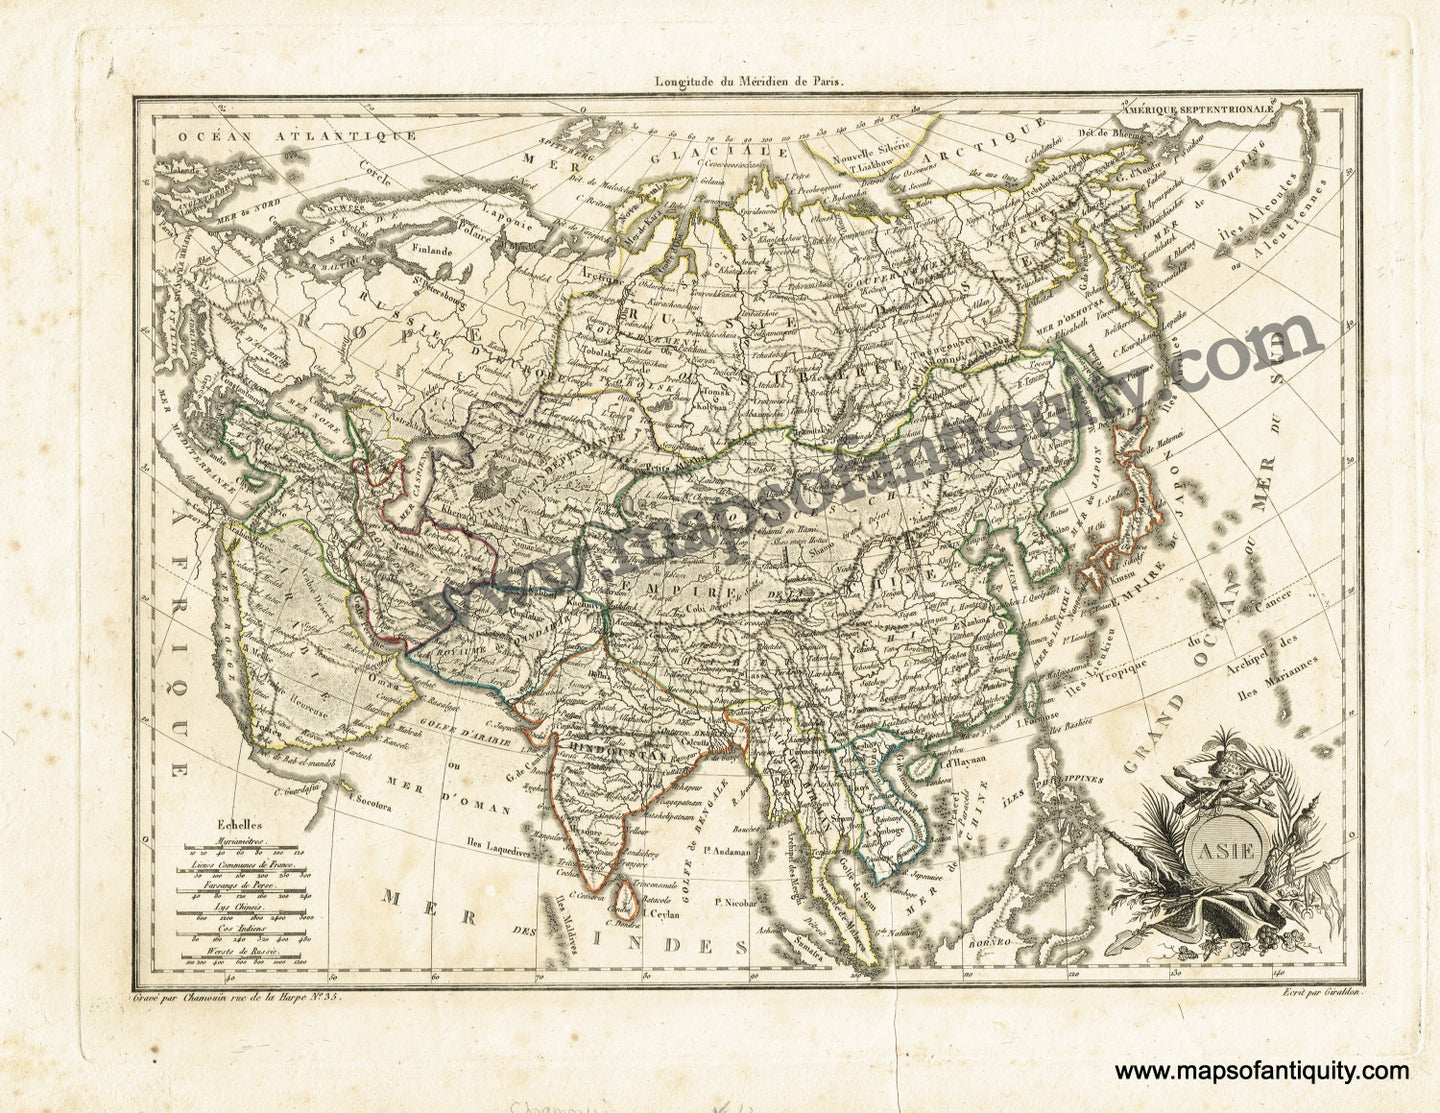 Black-and-White-Engraved-Antique-Map-with-Outline-Color-Asie-Asia-Asia-Asia-General-1815-Chamouin-Maps-Of-Antiquity